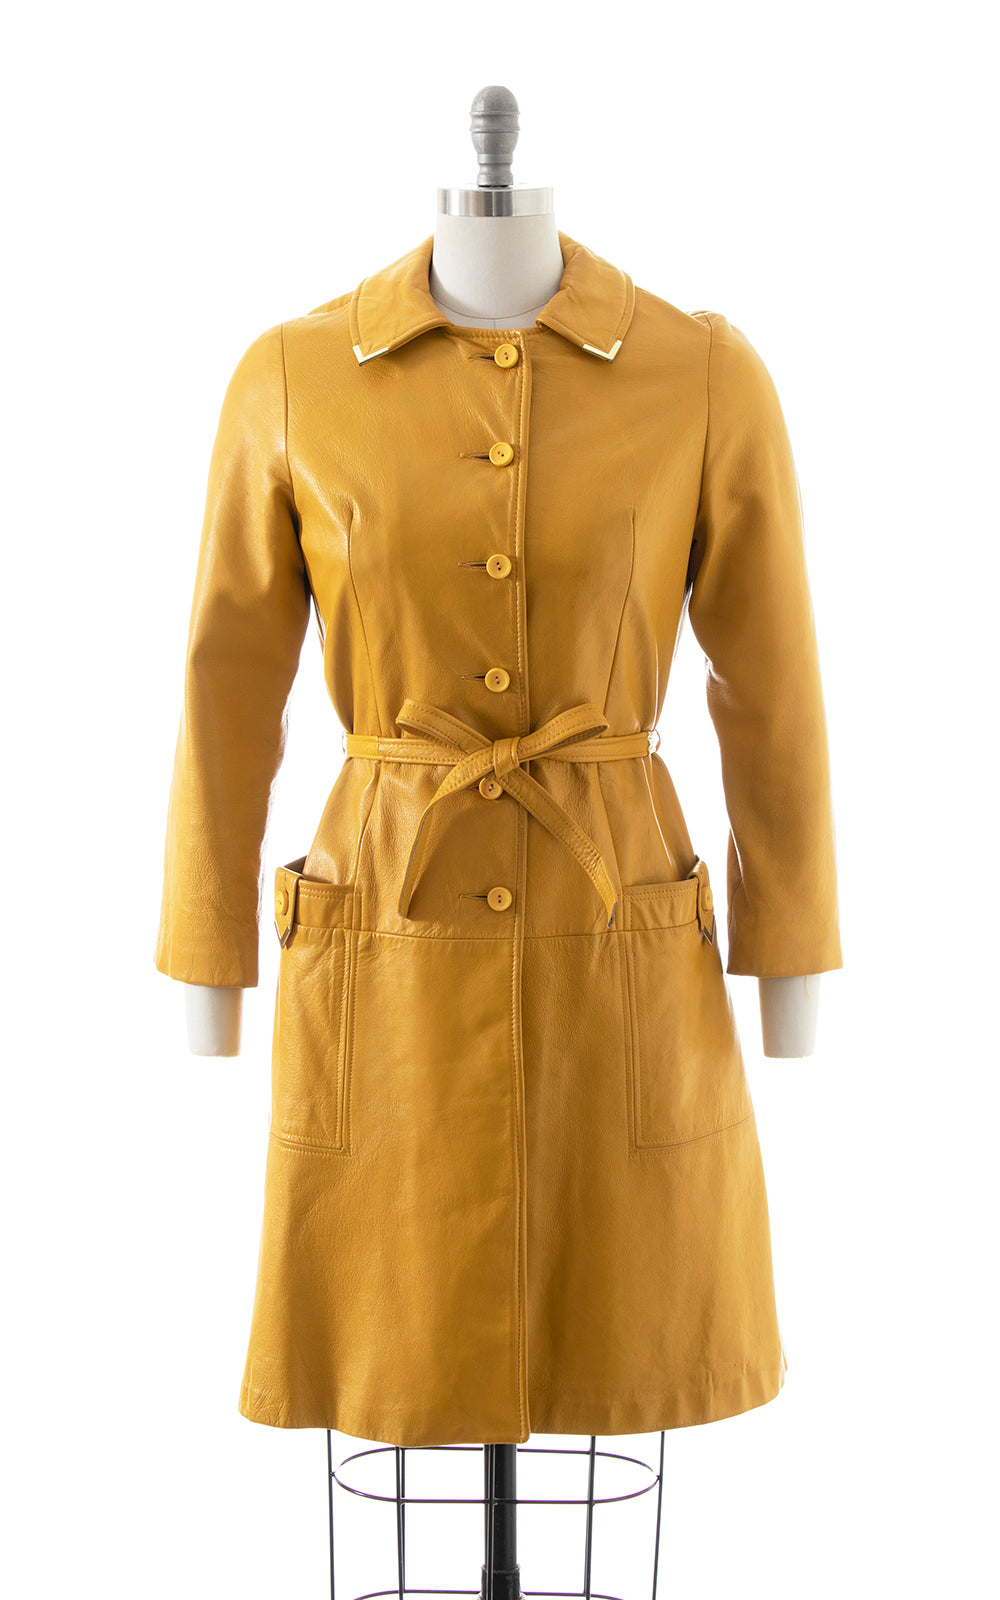 1960s 1970s Mustard Leather Coat with Brass Tips | x-small/small